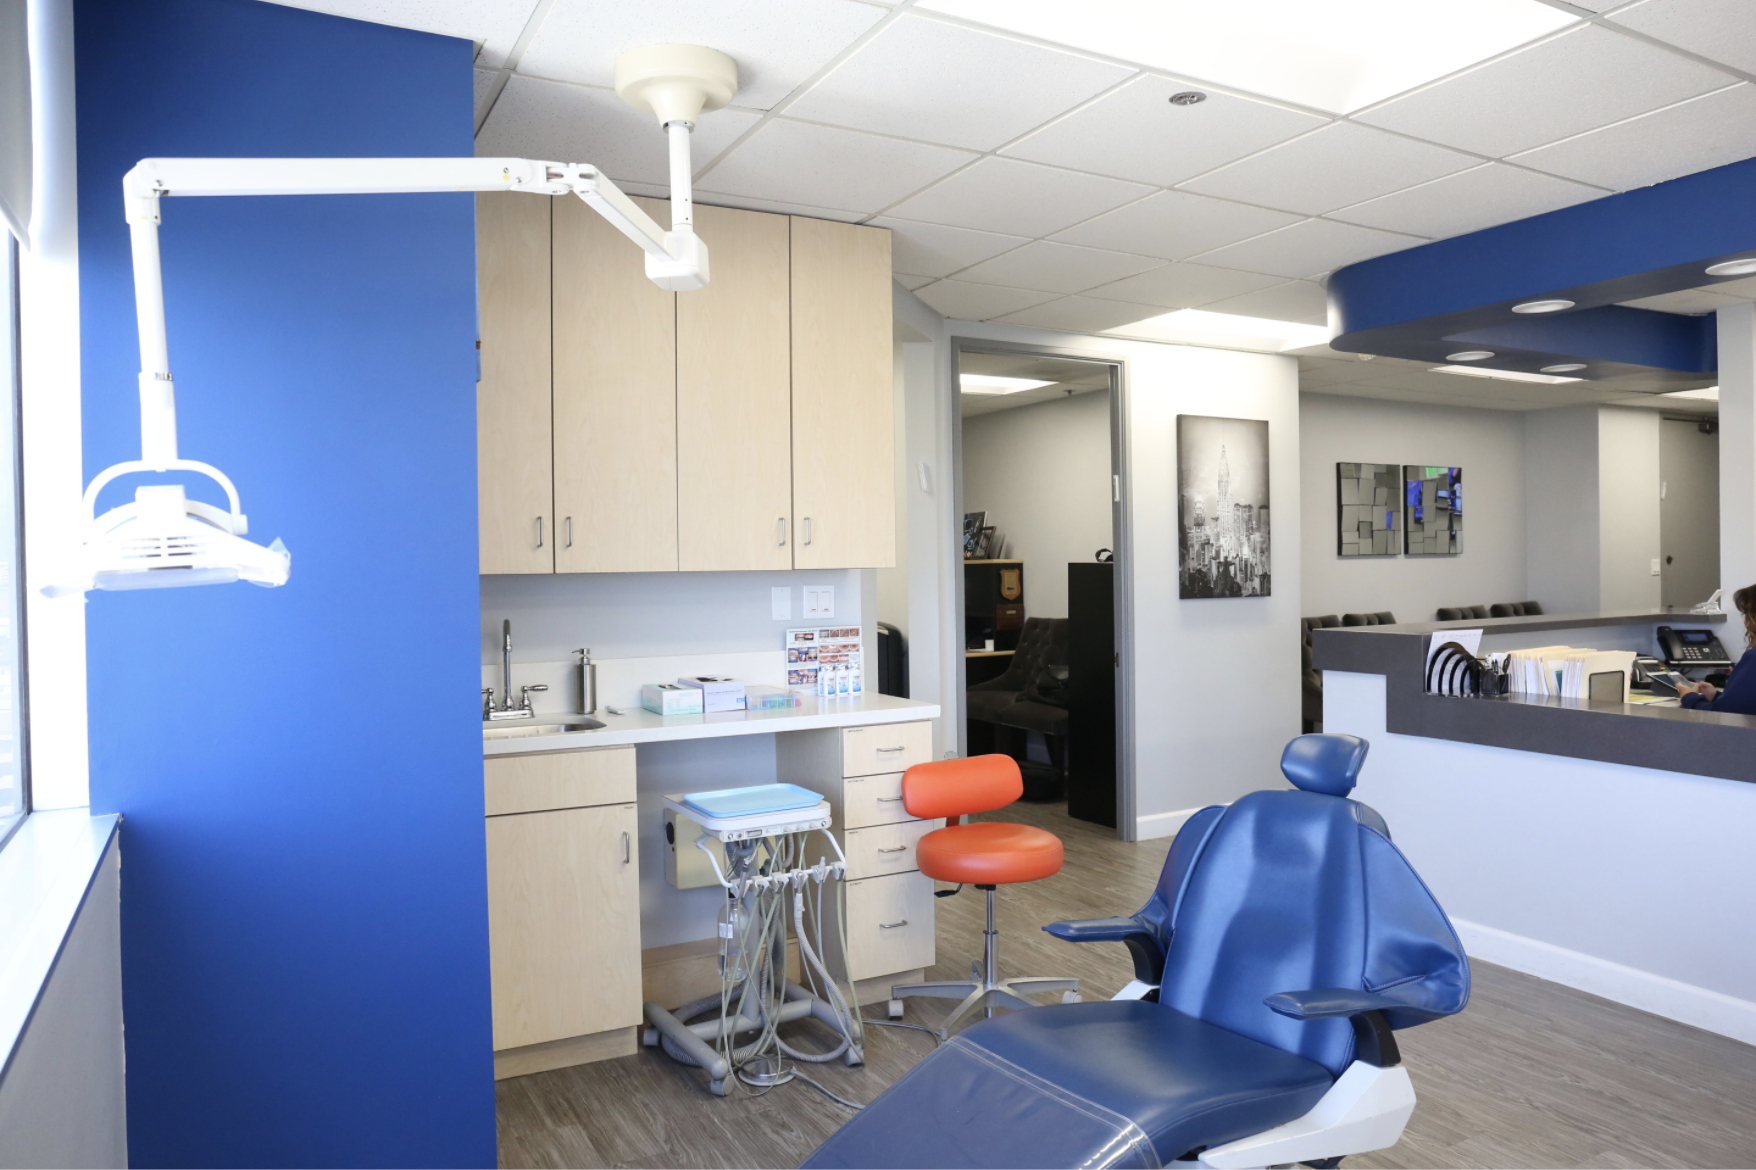 Orthodontics cleaning and consult area located in West Los Angeles